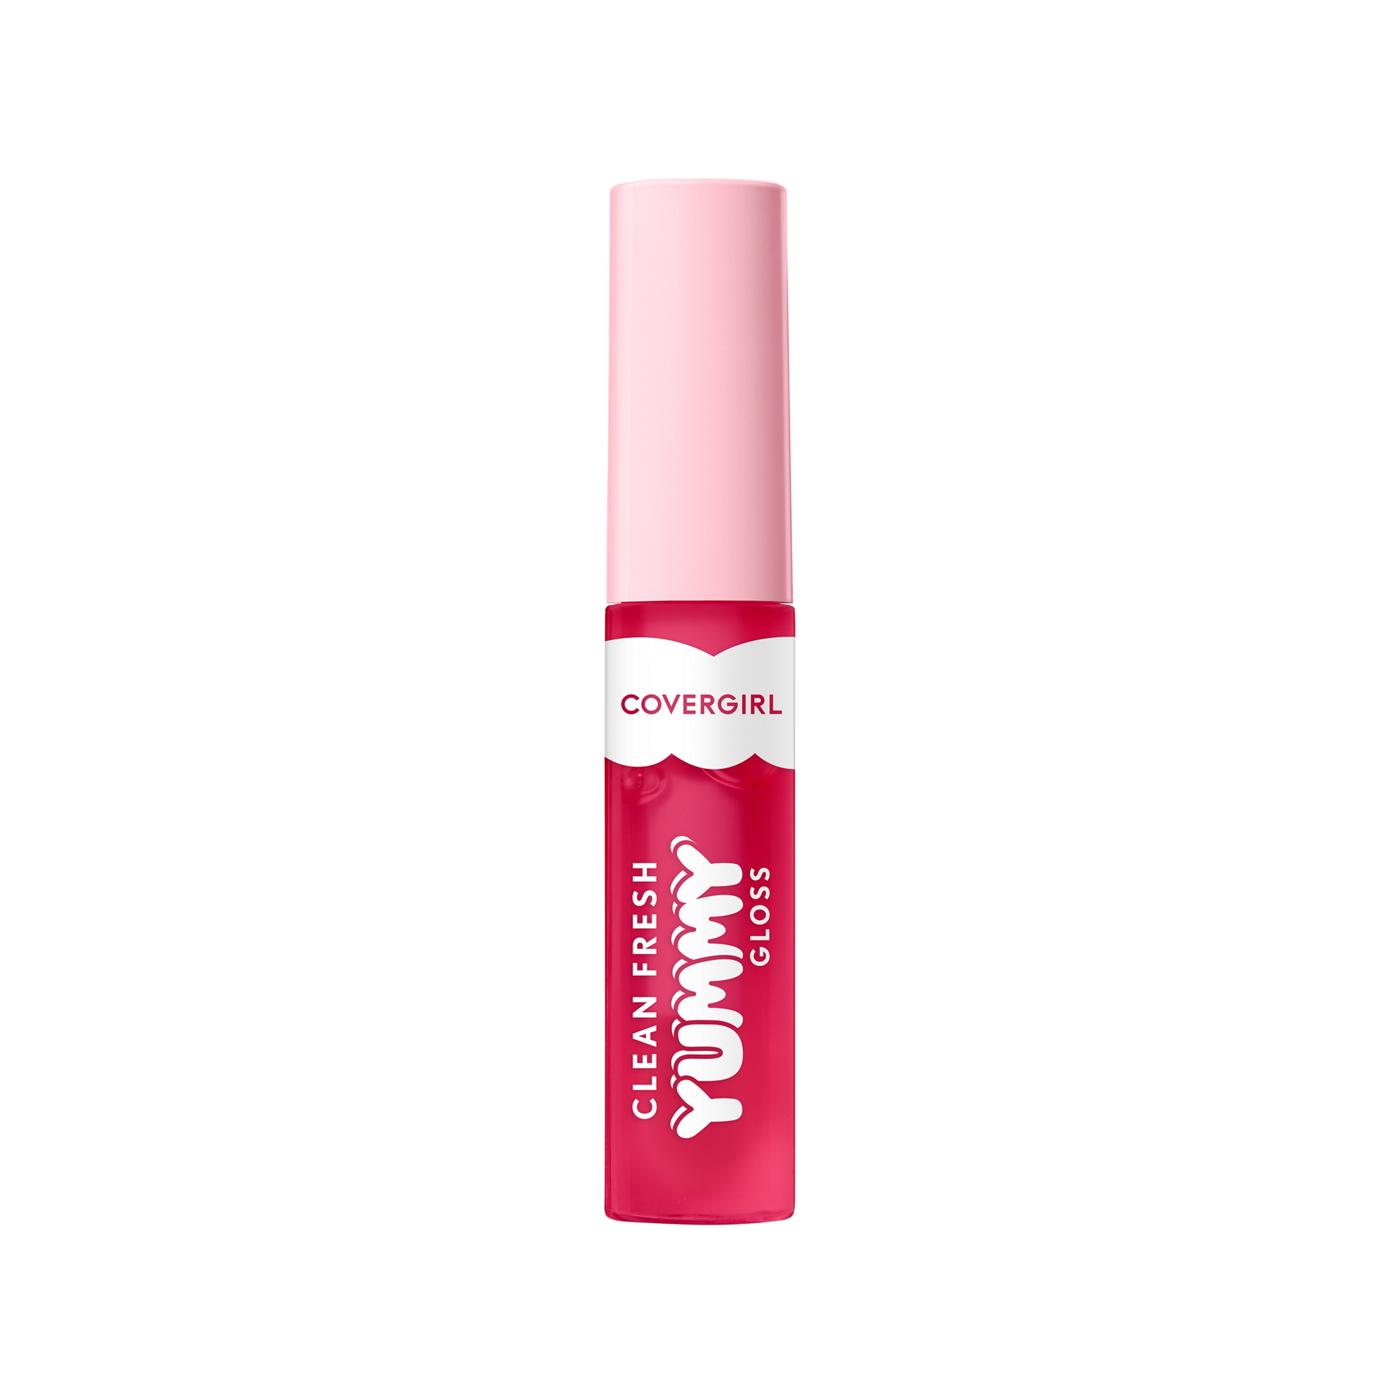 Covergirl Clean Fresh Yummy Lip Gloss - You're Just Jelly; image 3 of 10